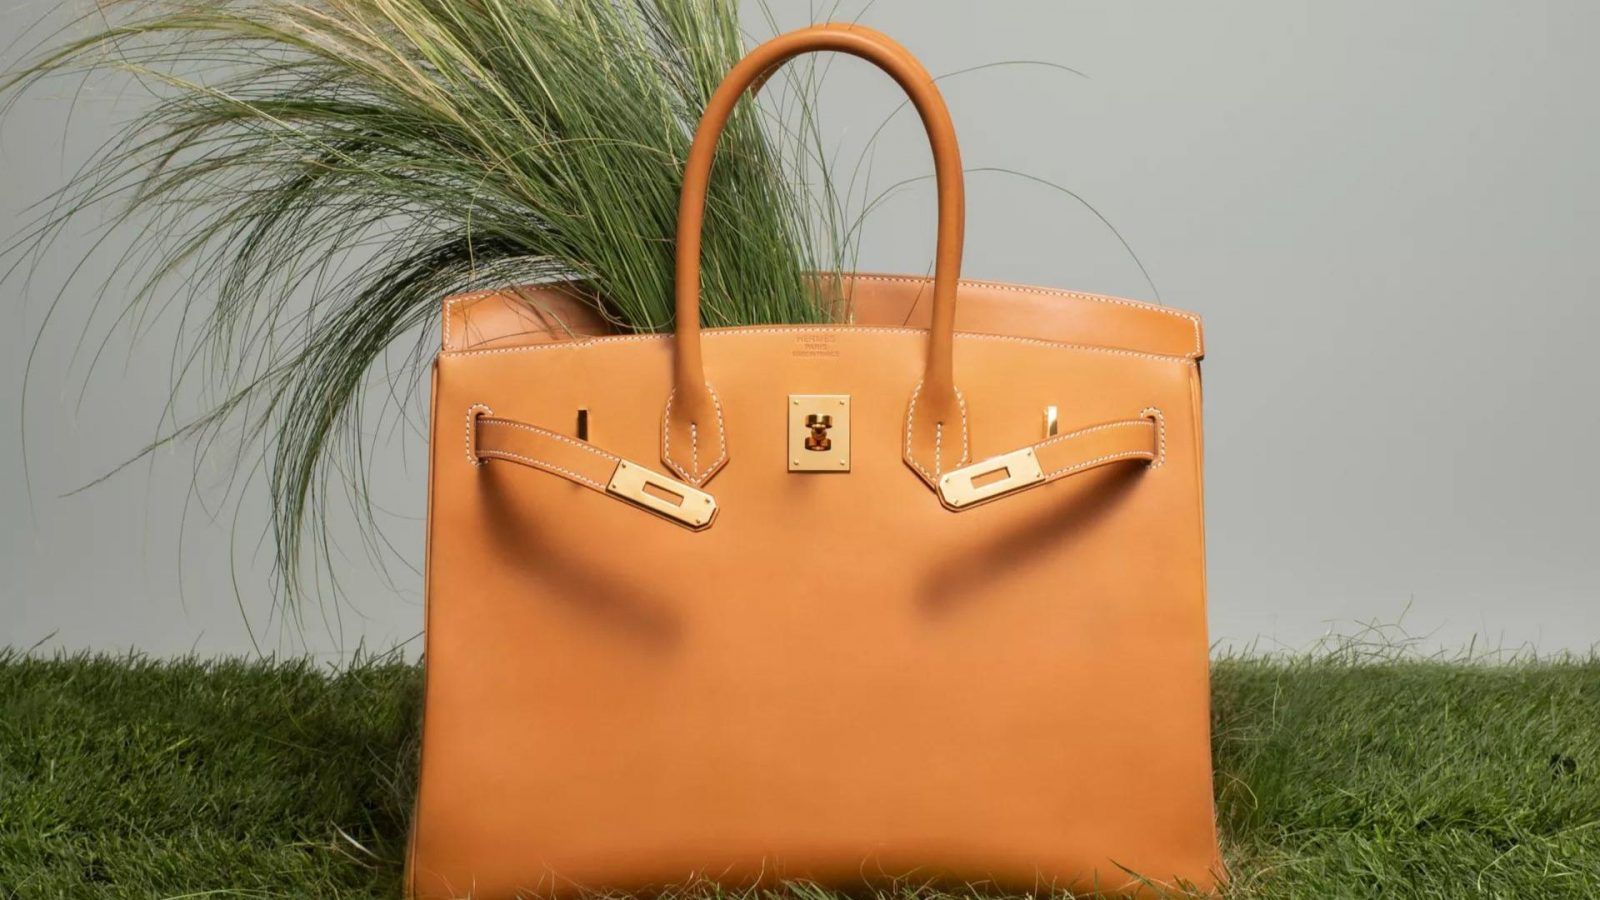 Hermès Birkin bags will become more expensive in 2023